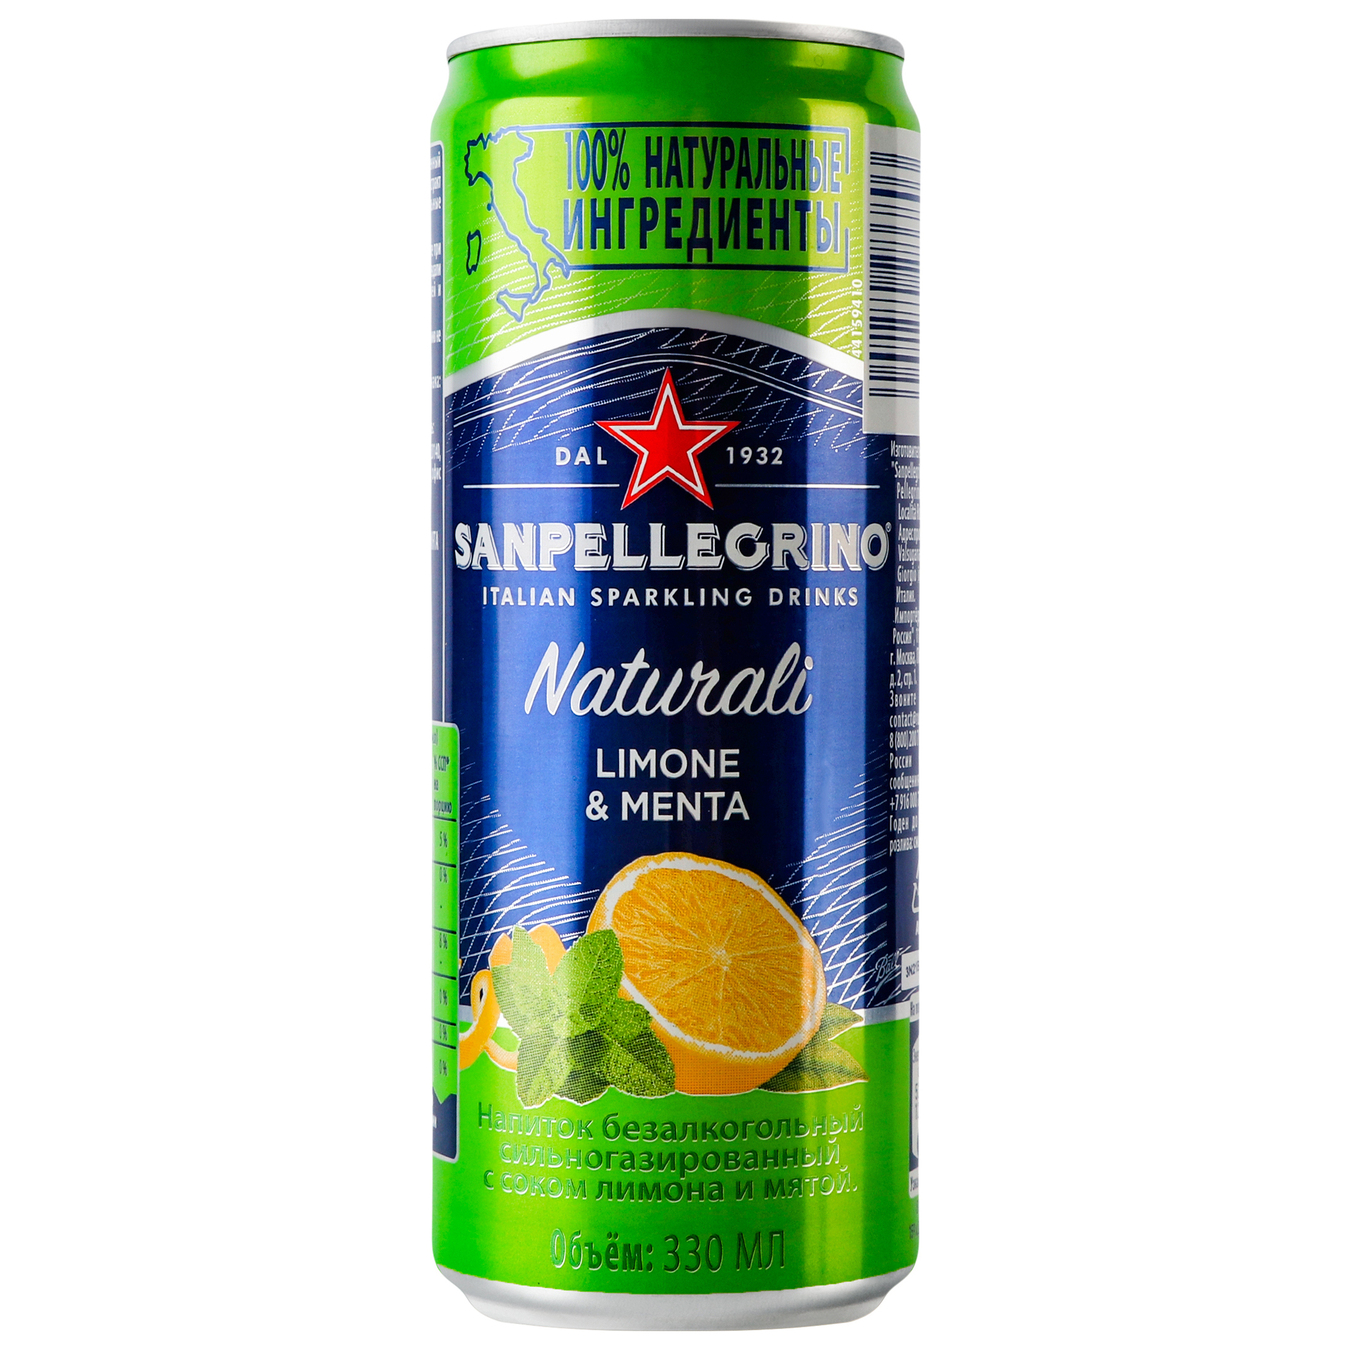 Carbonated drink Sanpellegrino Limone Menta iron can 330 ml